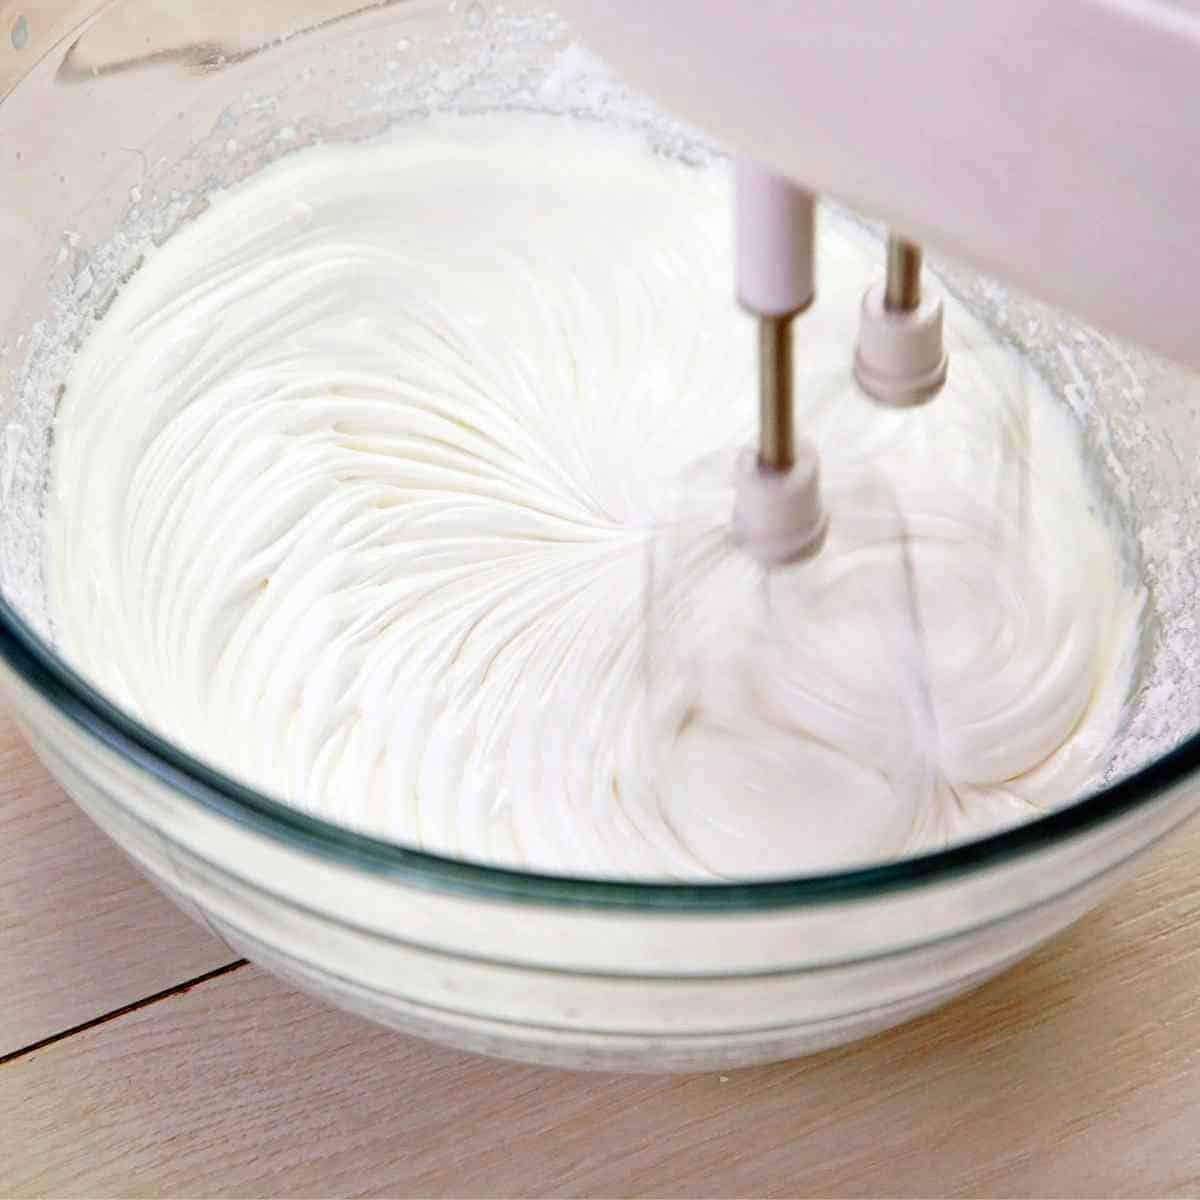 An electric mixer beating whipped cream in a bowl.